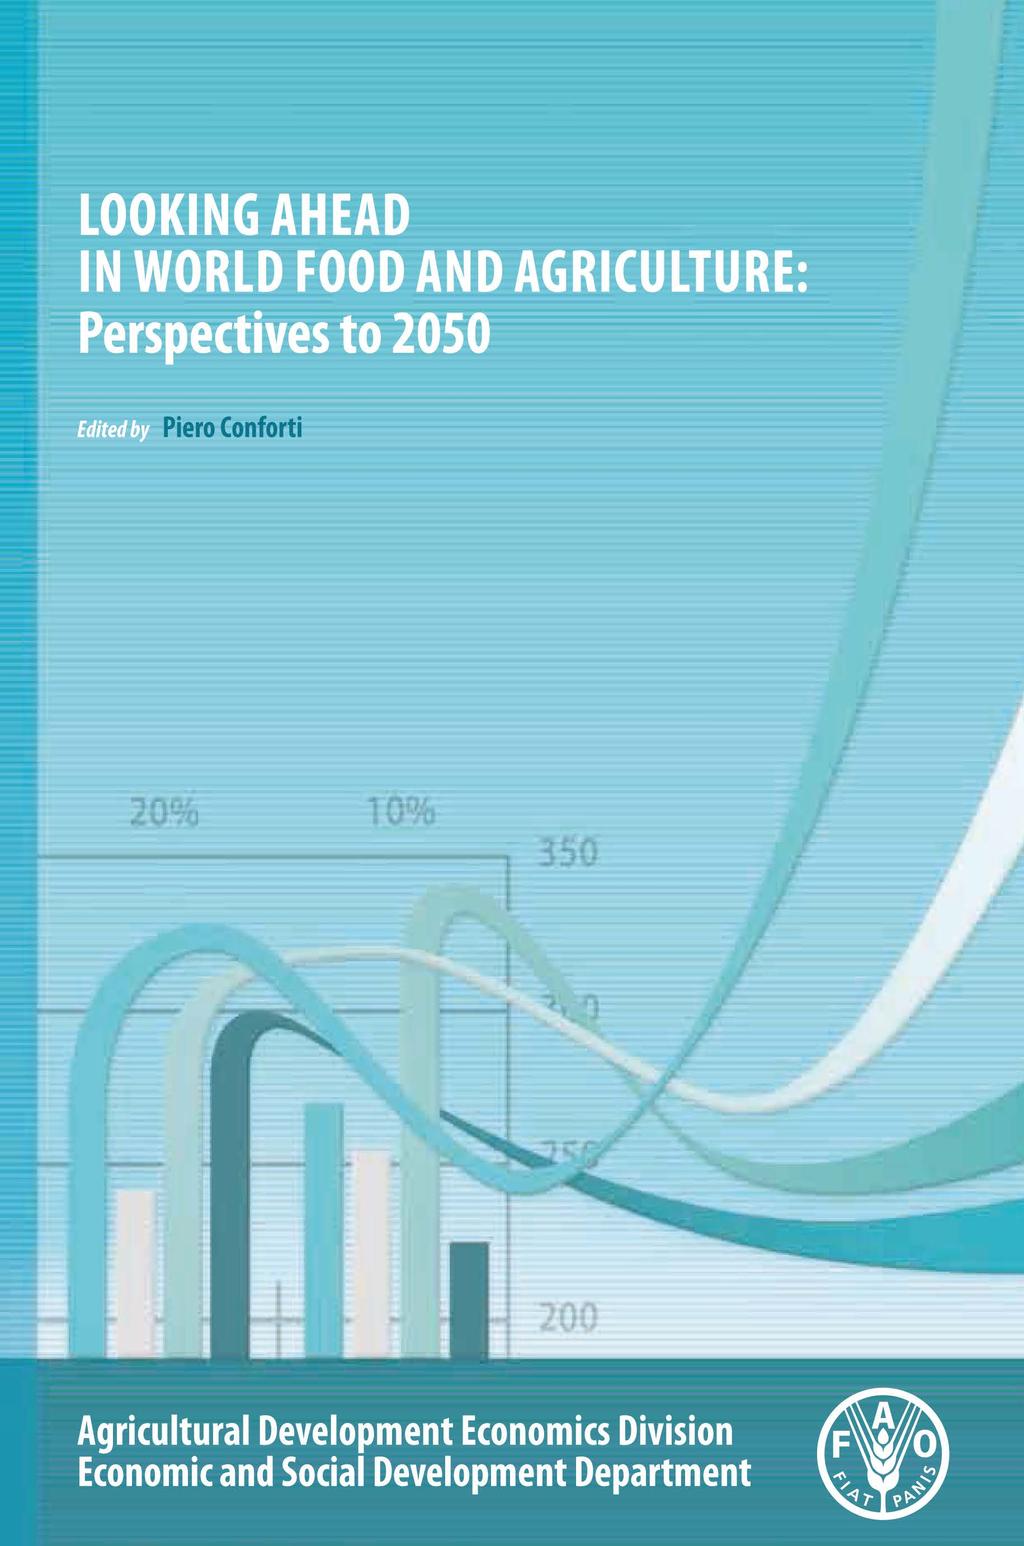 Each edition of the report contains a comprehensive, yet easily accessible, overview of a selected topic of major relevance for rural and agricultural development and for global food security.